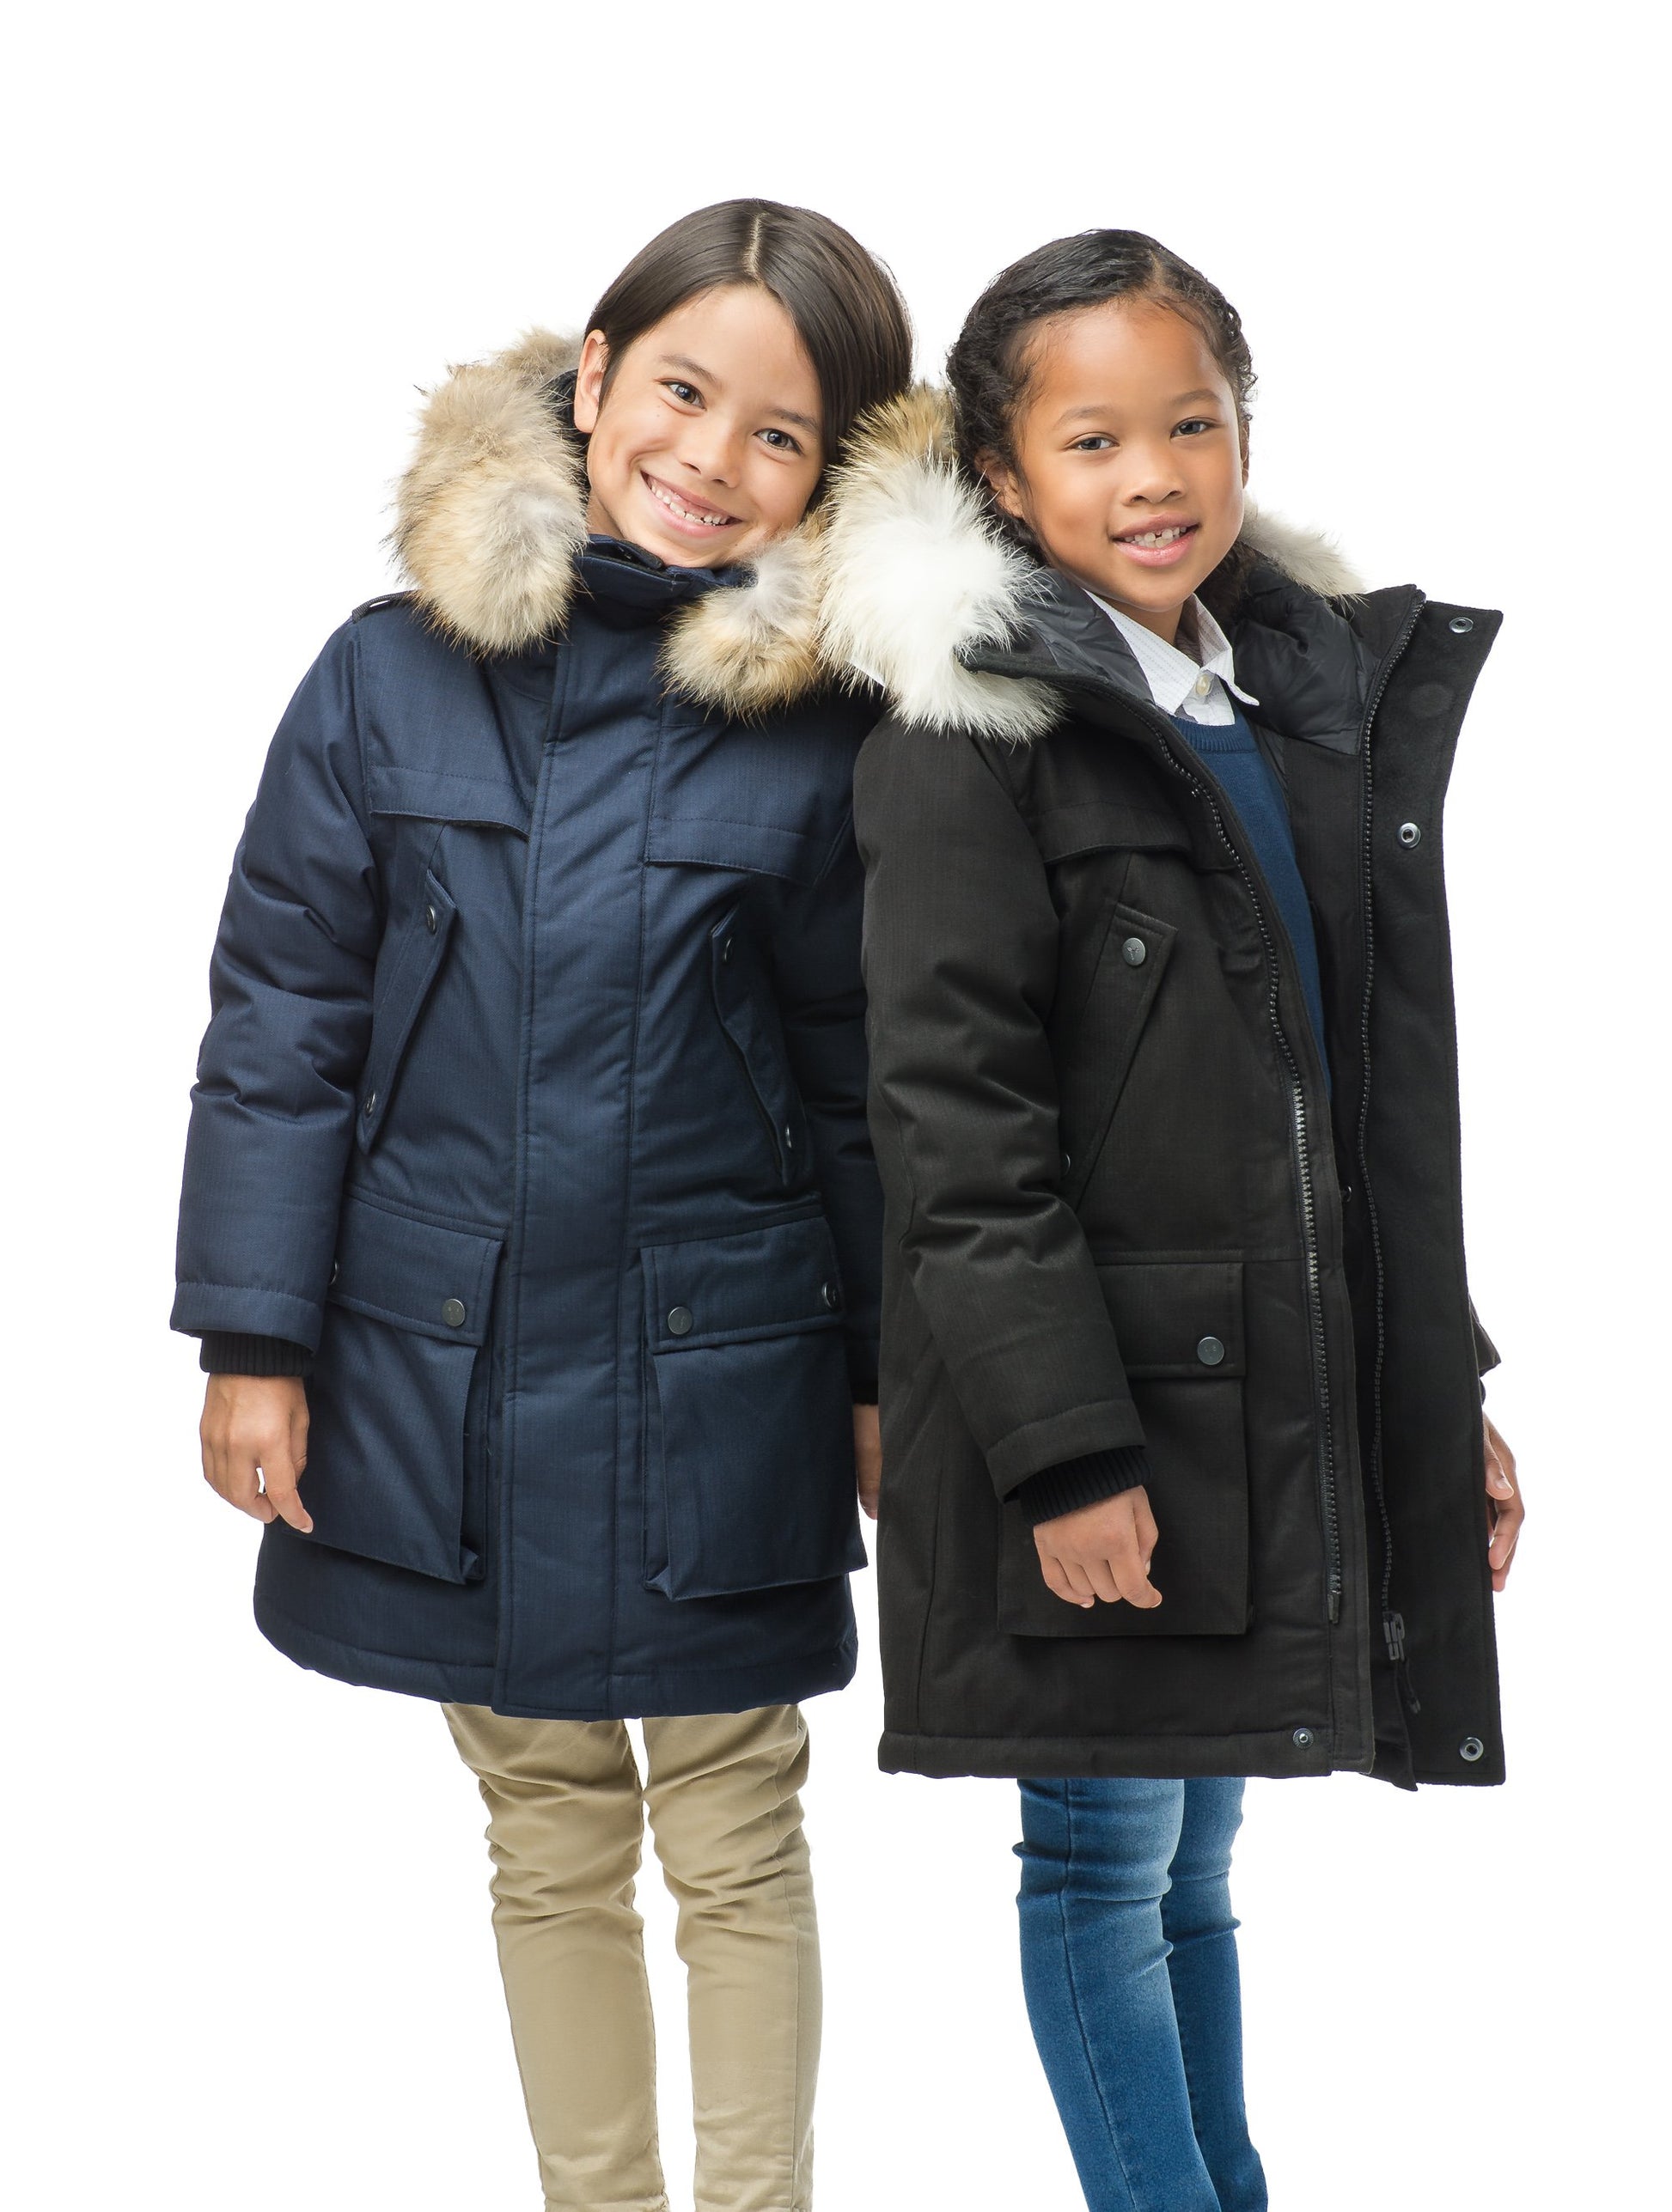 The best kid's down filled parka that's machine washable, waterproof, windproof and breathable in CH Navy or CH Black